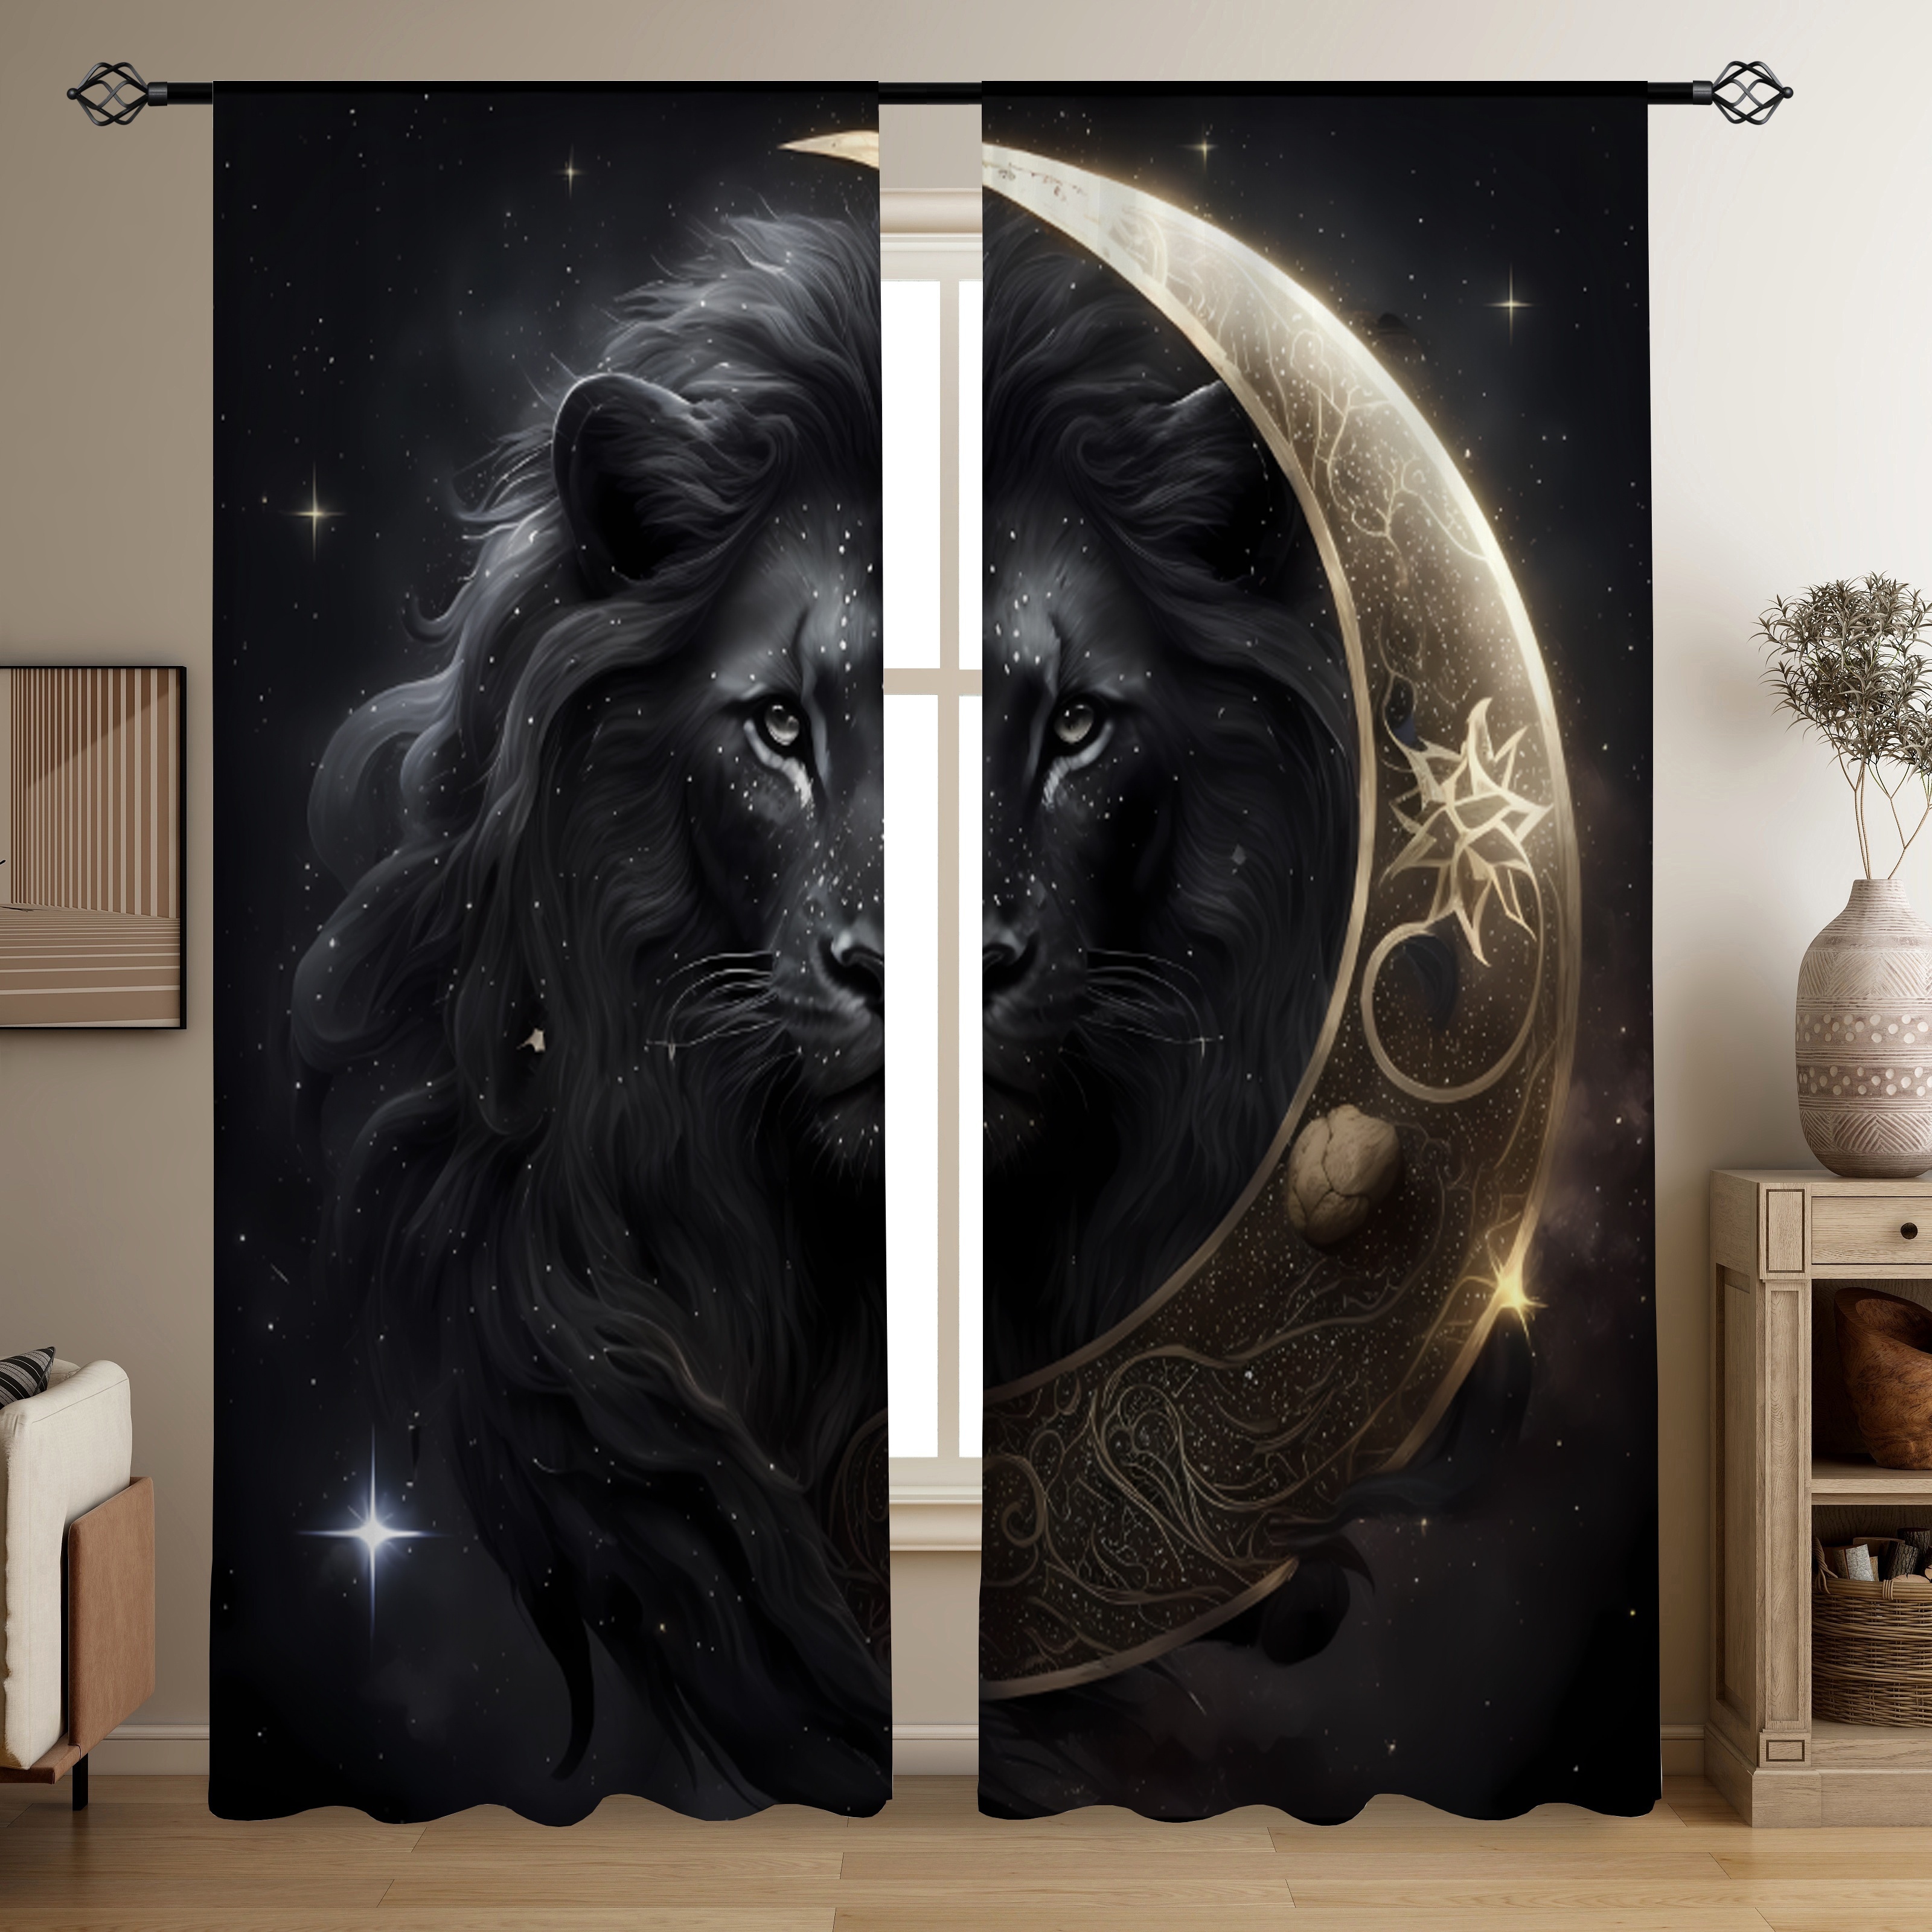 

2pcs, Lion Moon Printed Translucent Curtains, Multi-scene Polyester Rod Pocket Decorative Curtains For Living Room Game Room Bedroom Home Decor Party Supplies